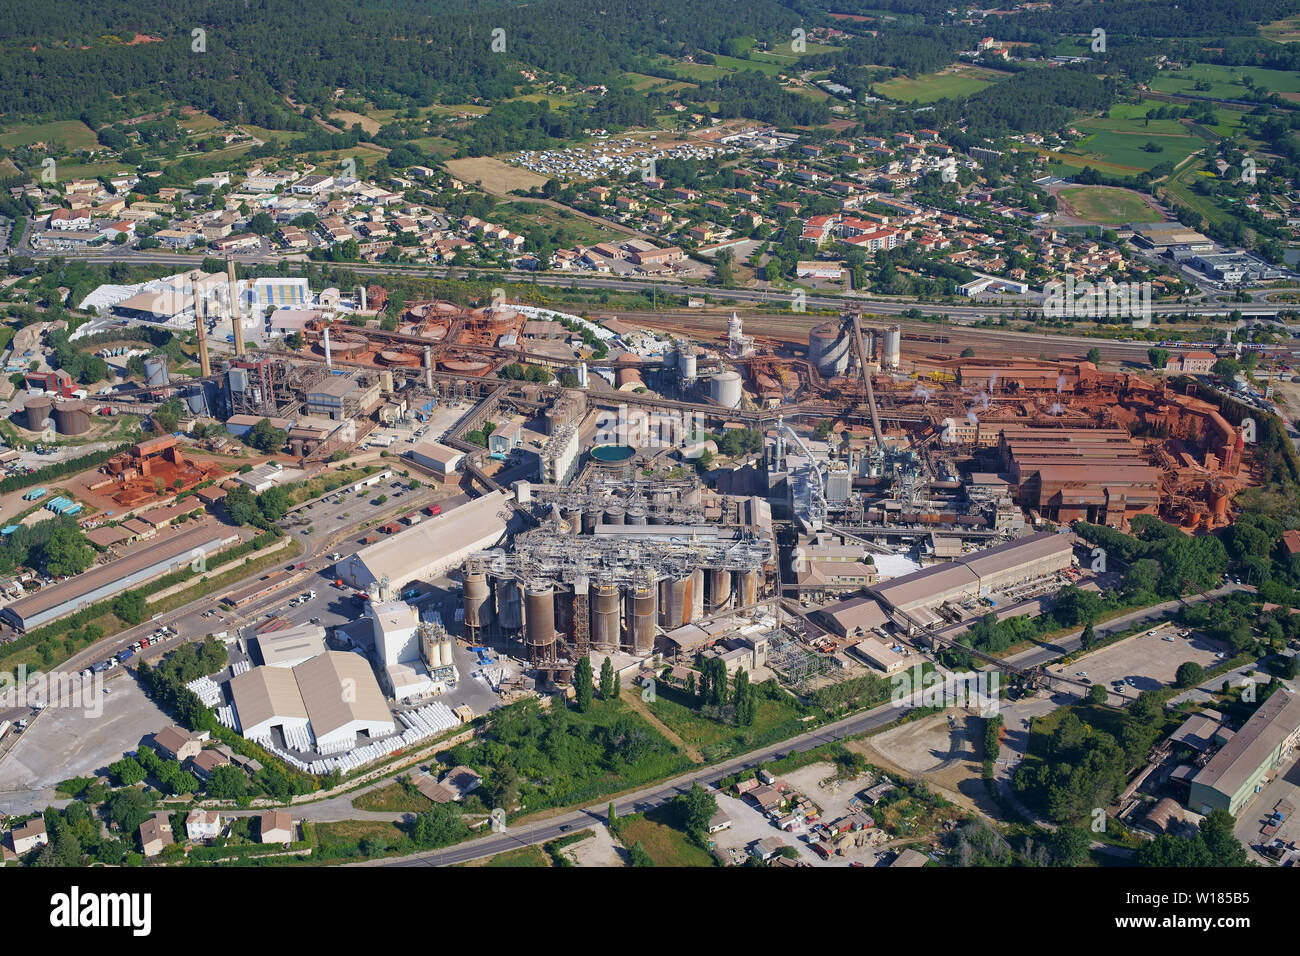 AERIAL VIEW. The Alteo Factory: a worldwide leader in the production of alumina from imported bauxite. Gardanne, Bouches-du-Rhône, Provence, France. Stock Photo